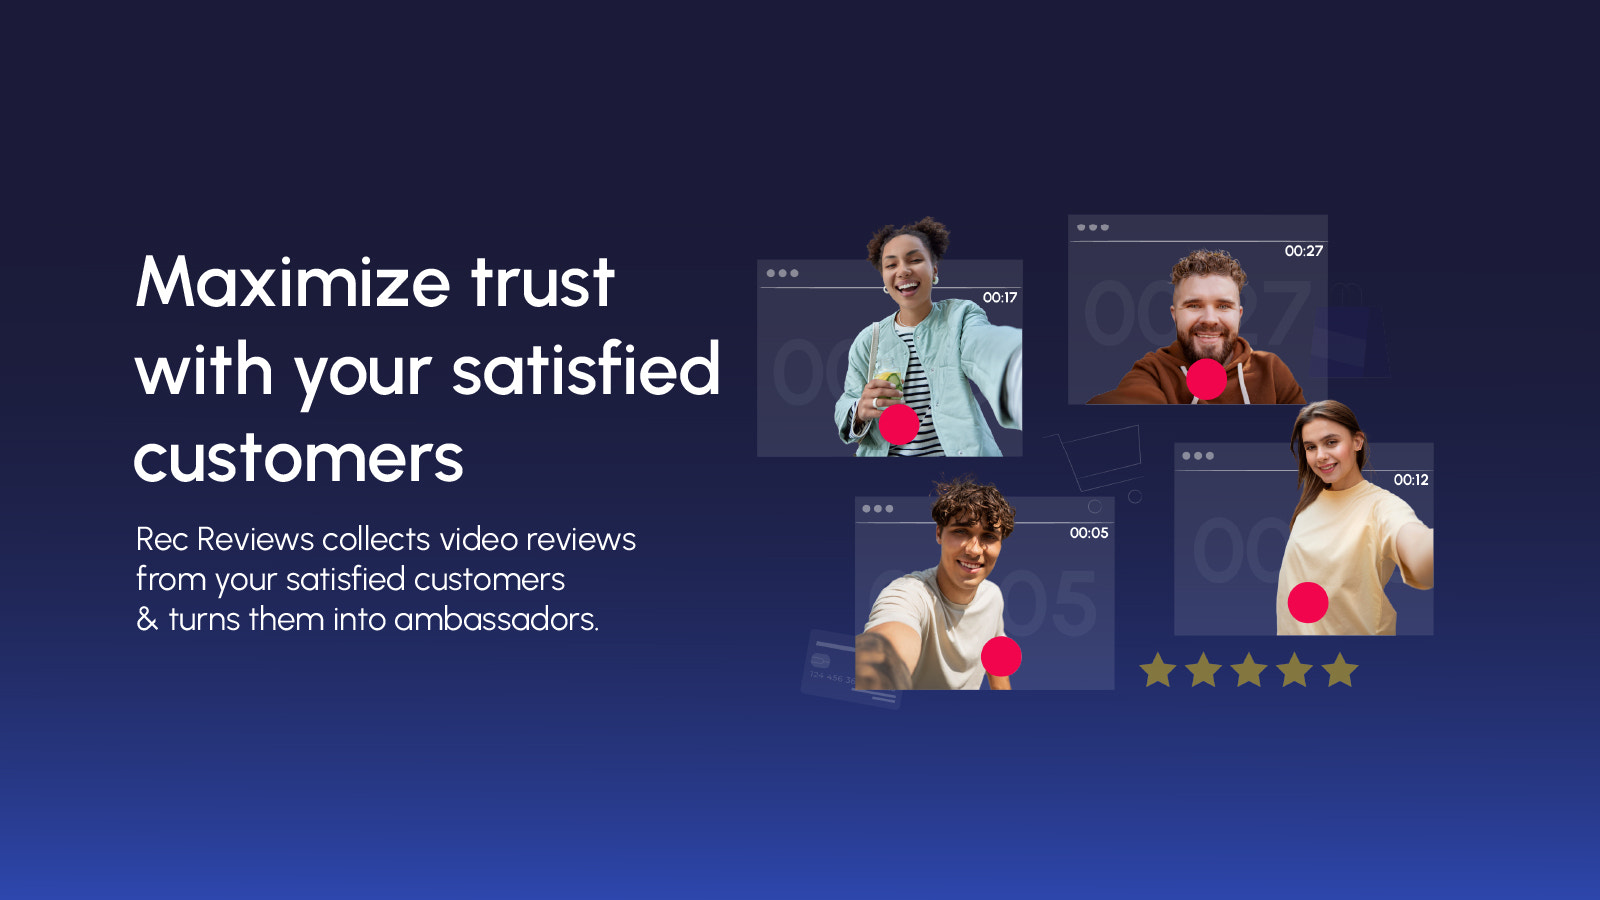 Maximize trust with your satisfied customers